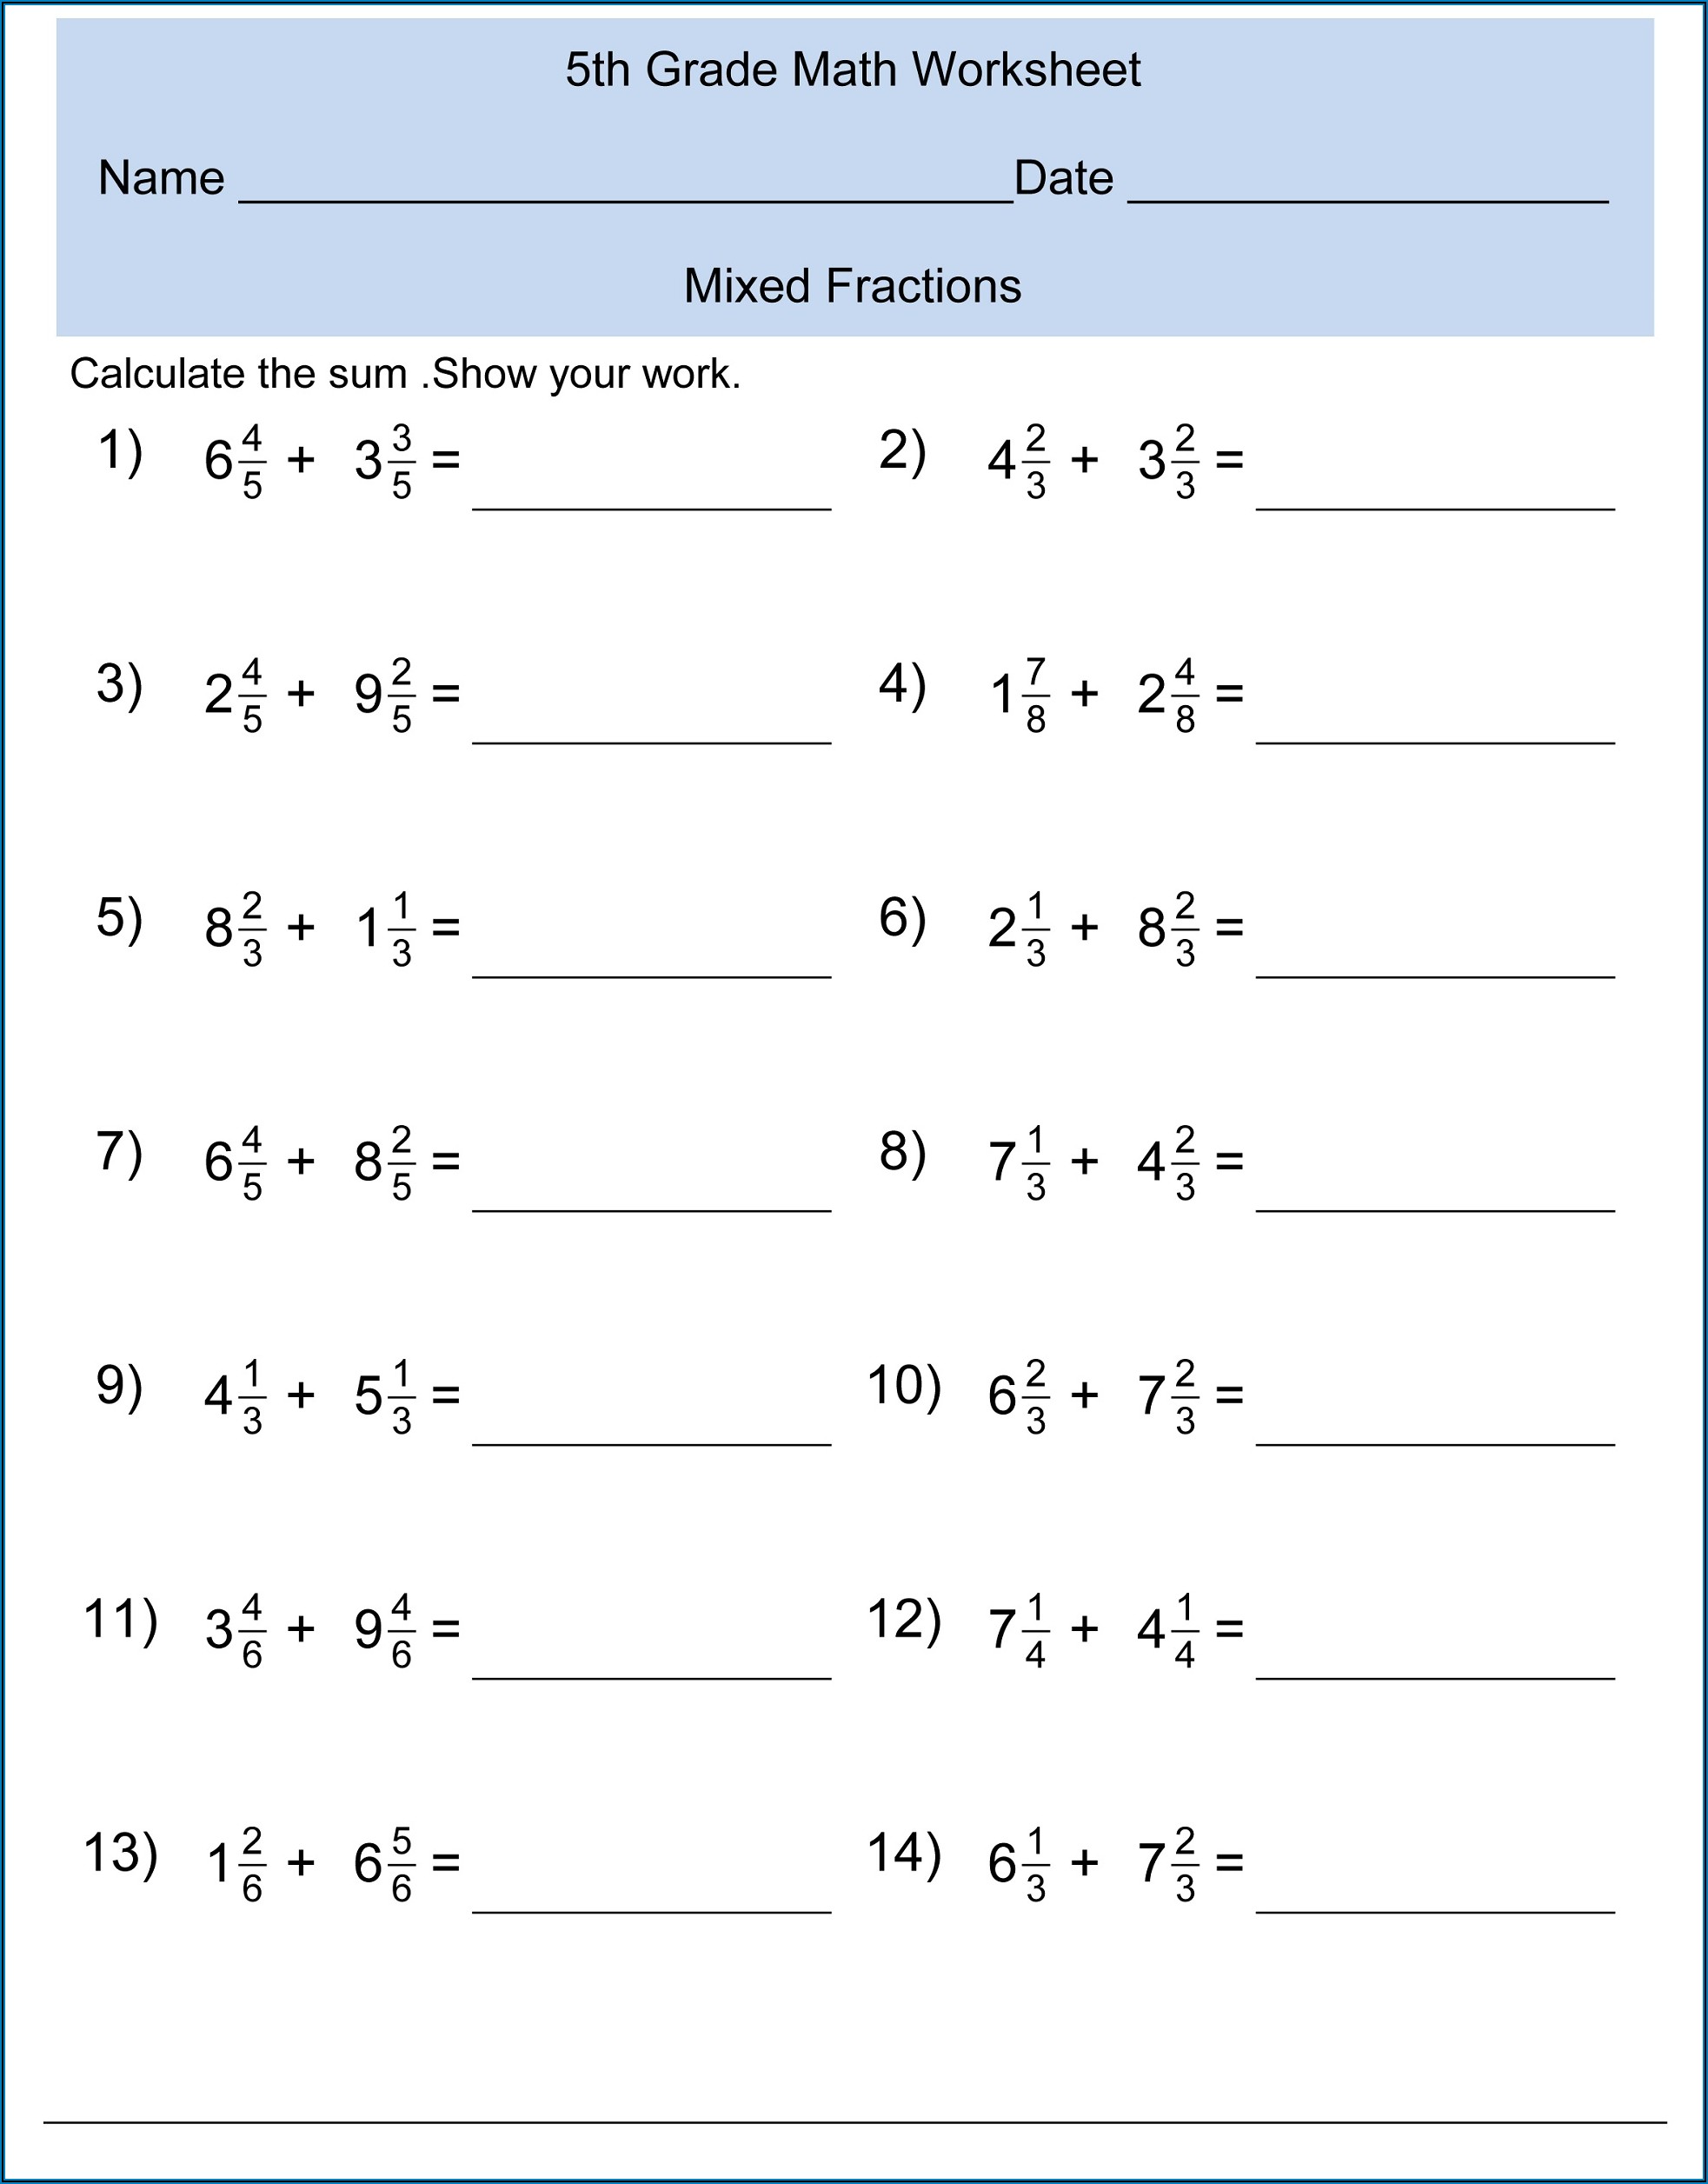 Math Worksheets For Grade 3 Addition Word Problems